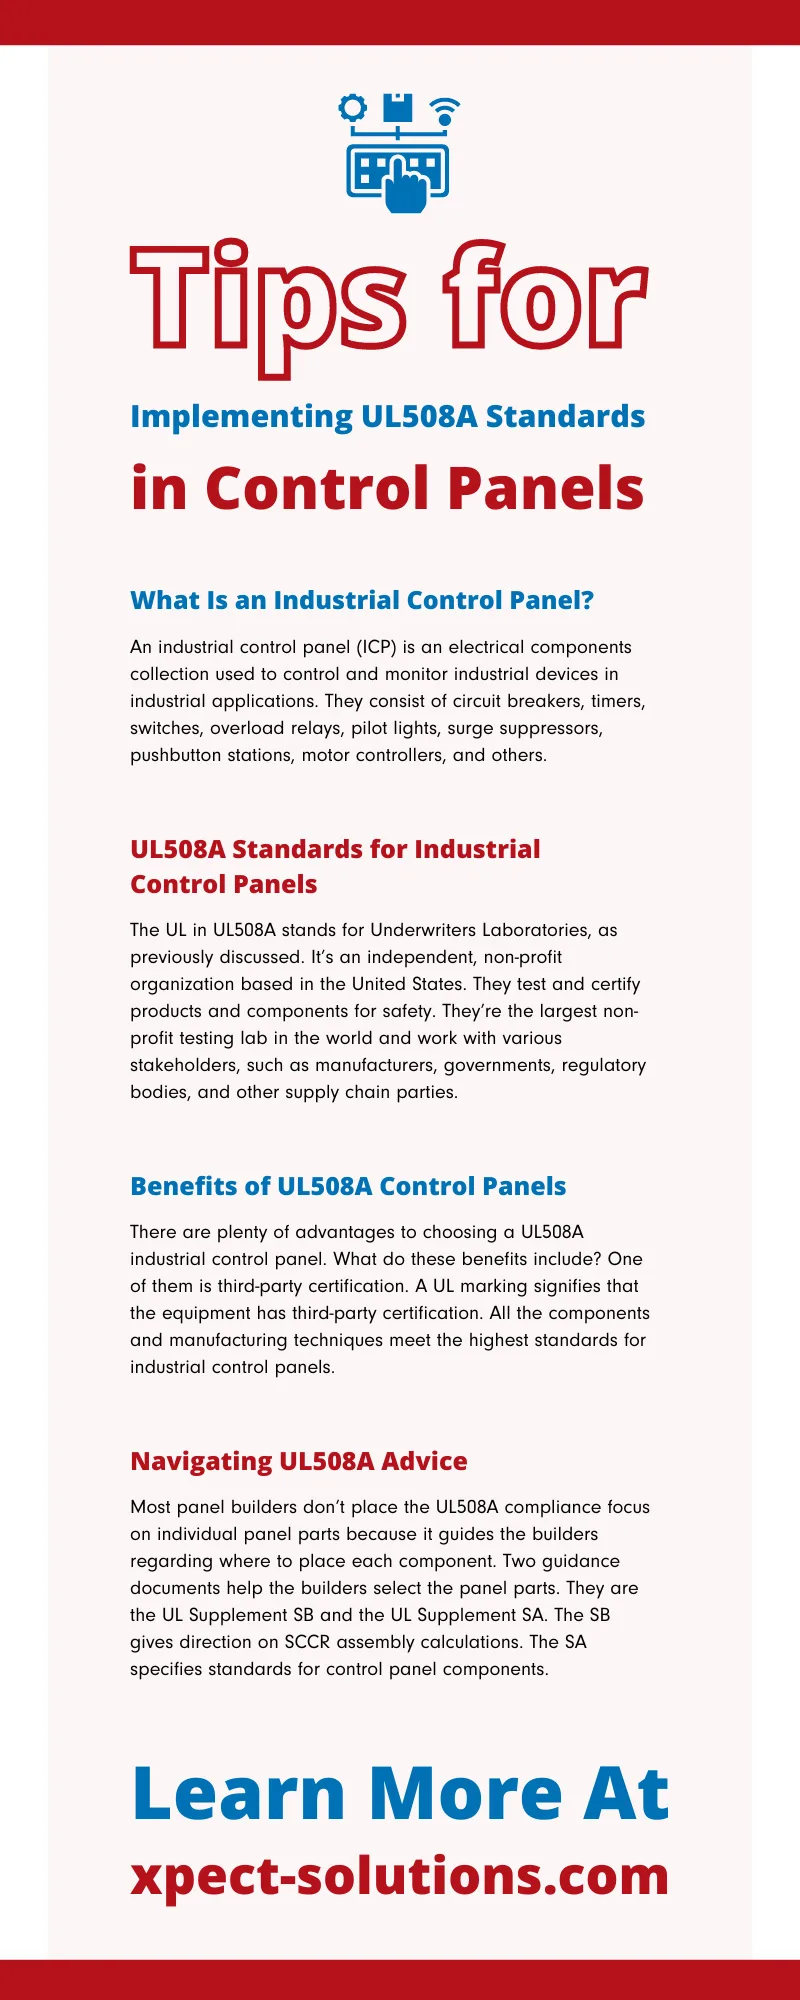 Tips for Implementing UL508A Standards in Control Panels